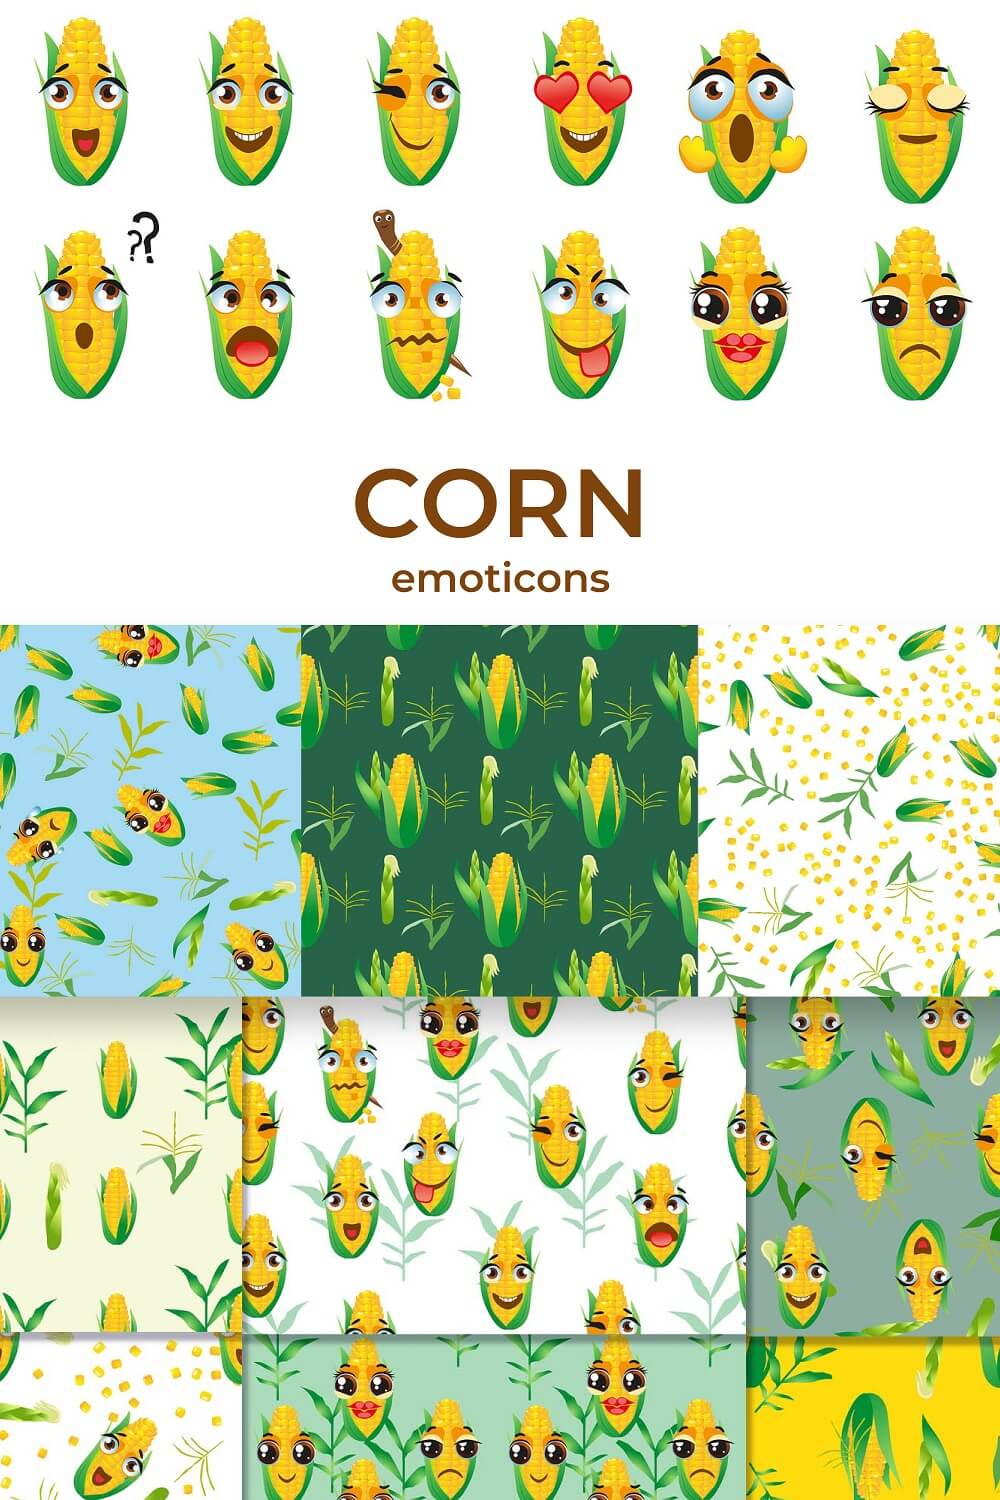 Real and cartoon images of corn.